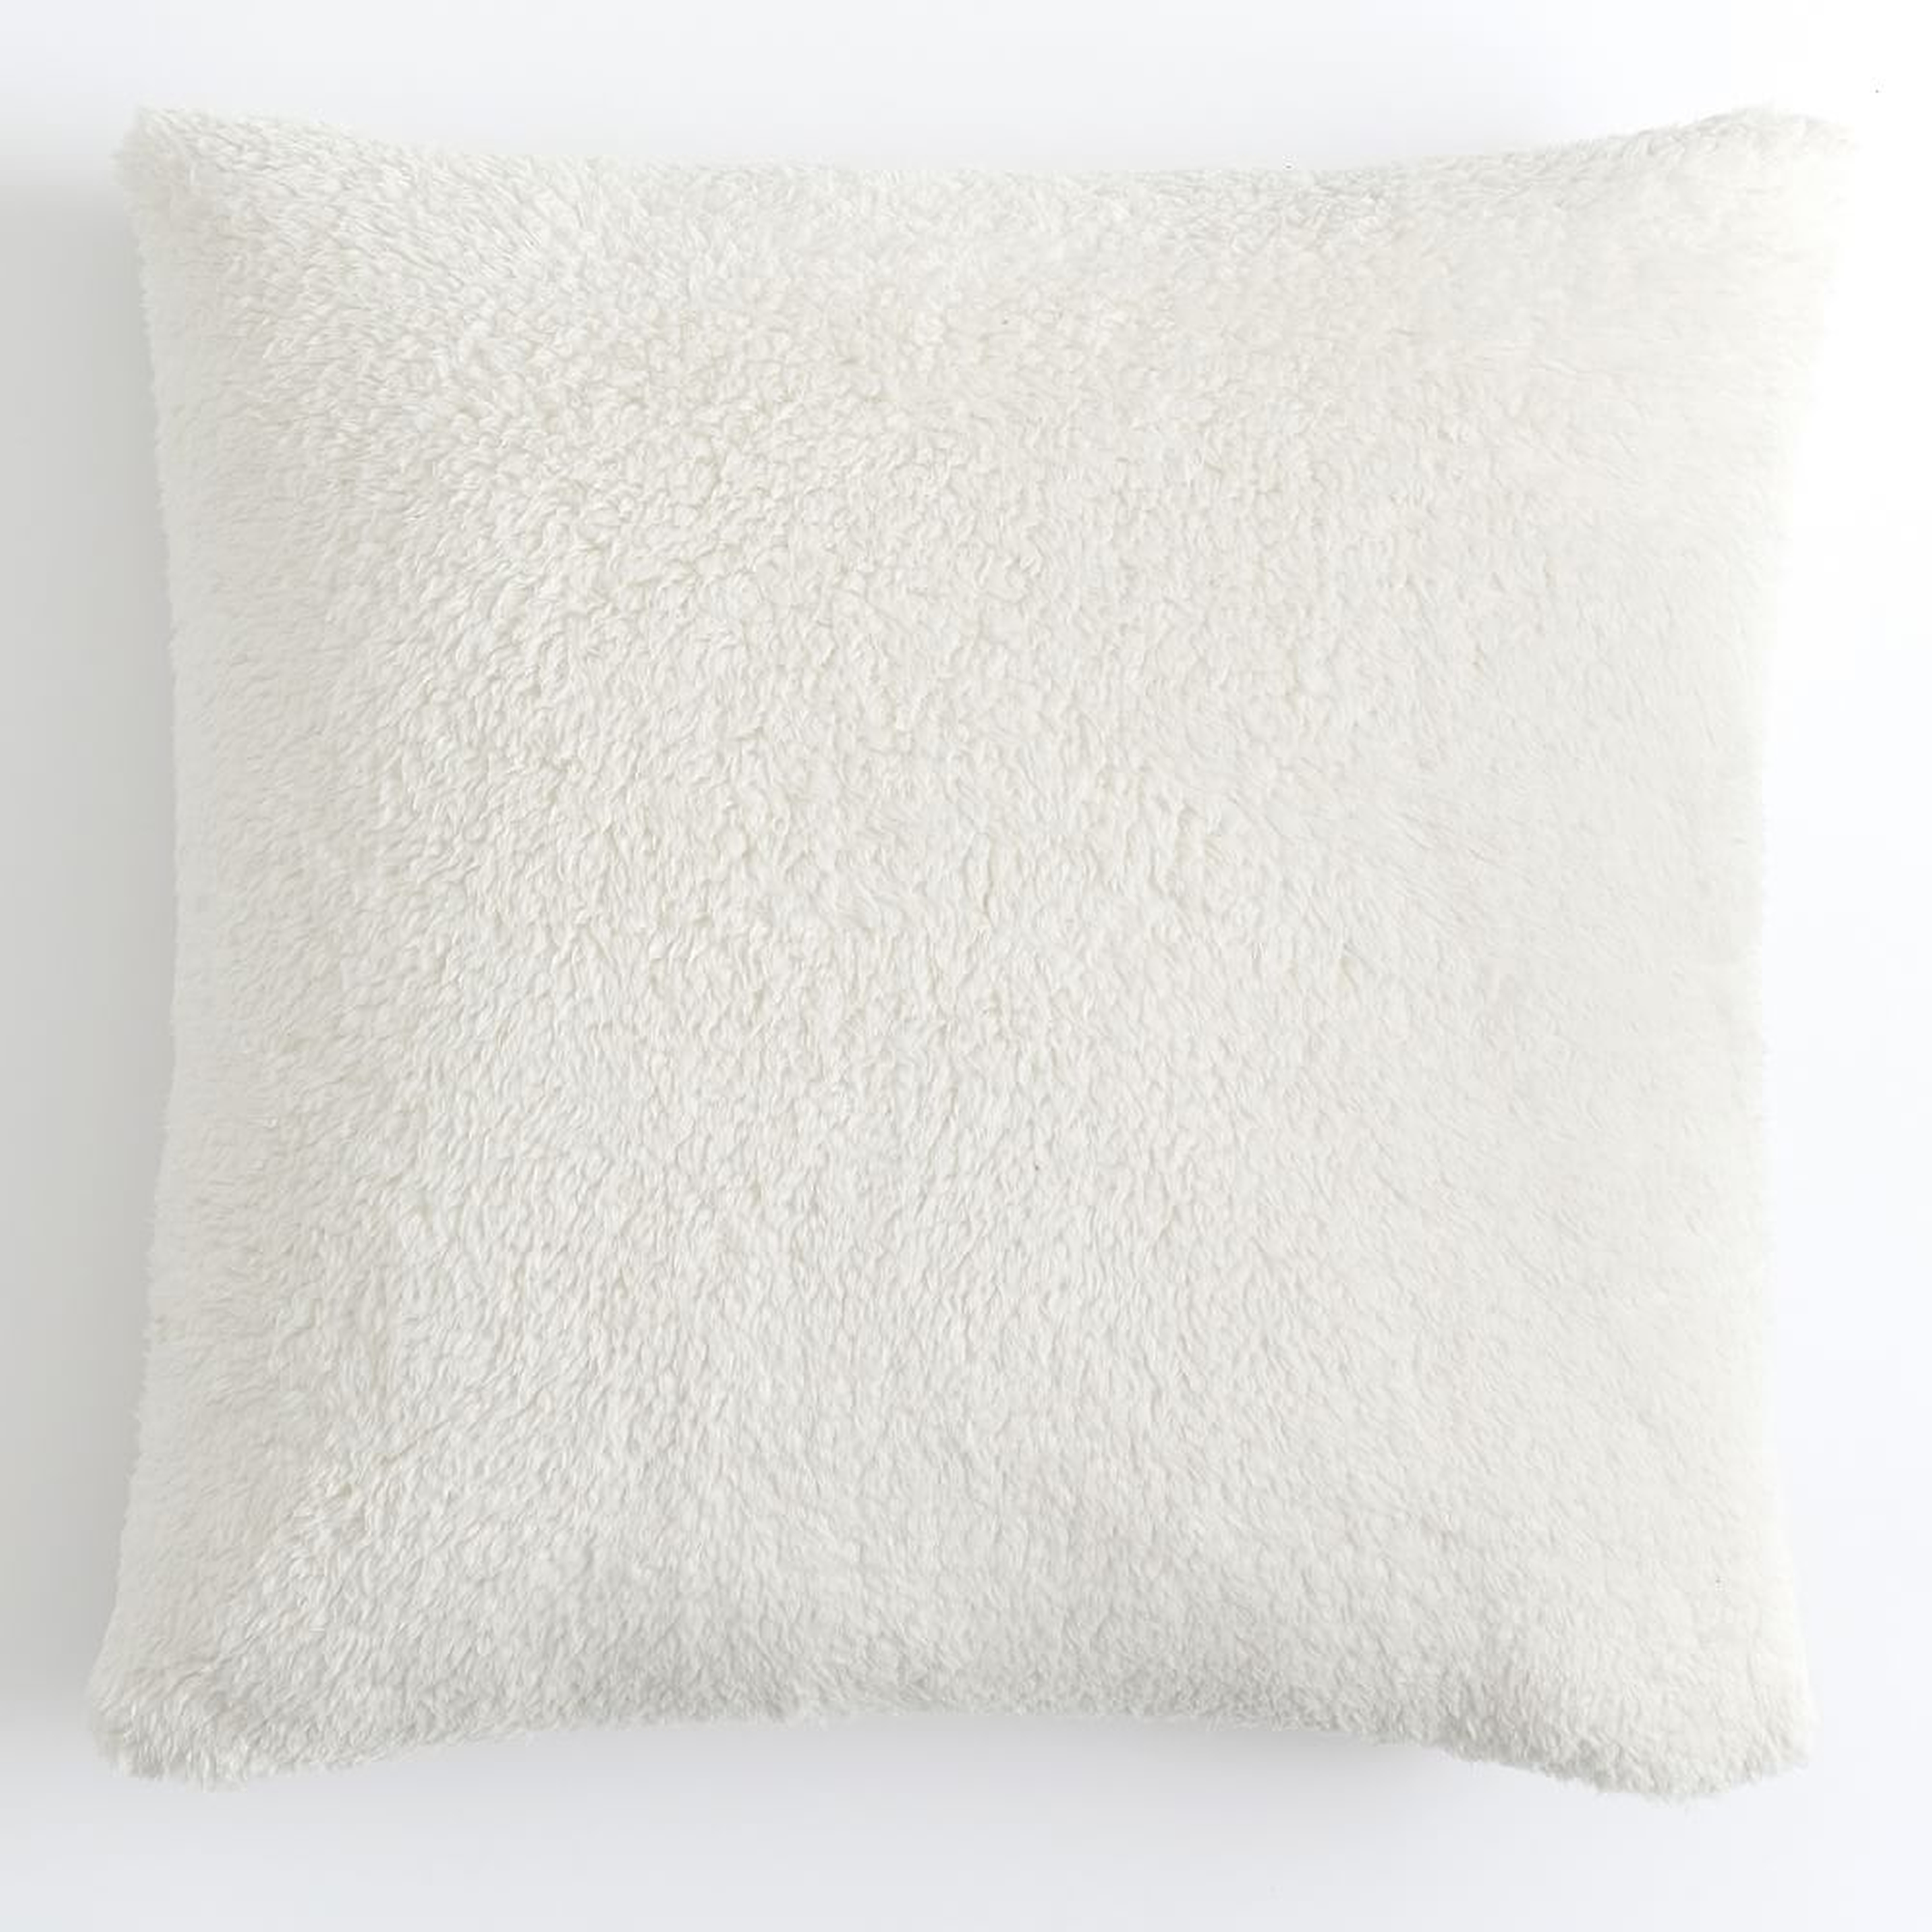 Recycled Cozy Euro Pillow Cover + Insert Set, Euro, Ivory - Pottery Barn Teen